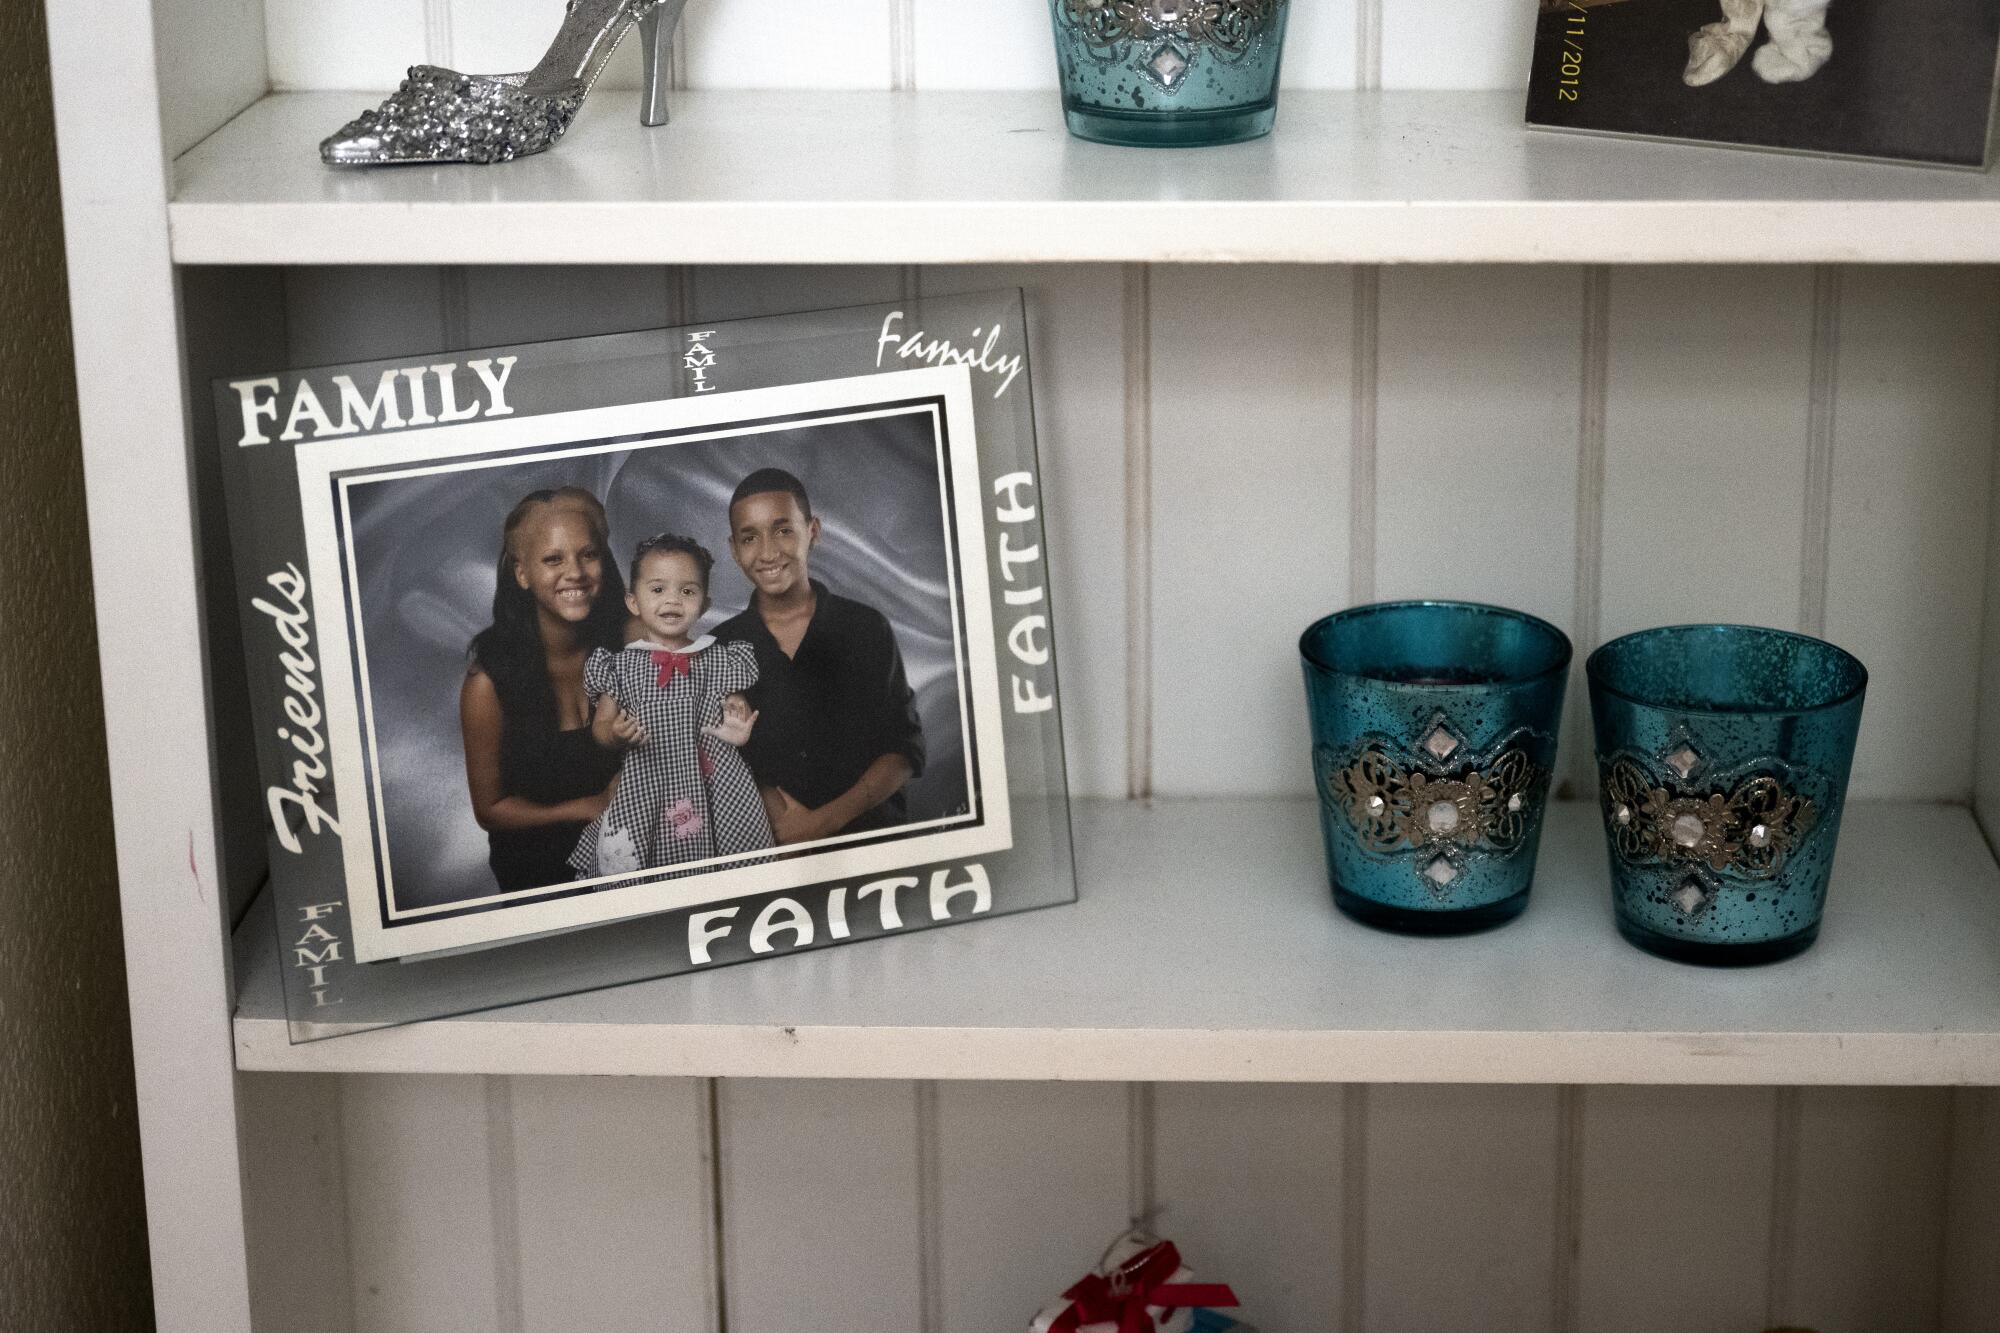 A photo of three children sits on a shelf with decorative objects.